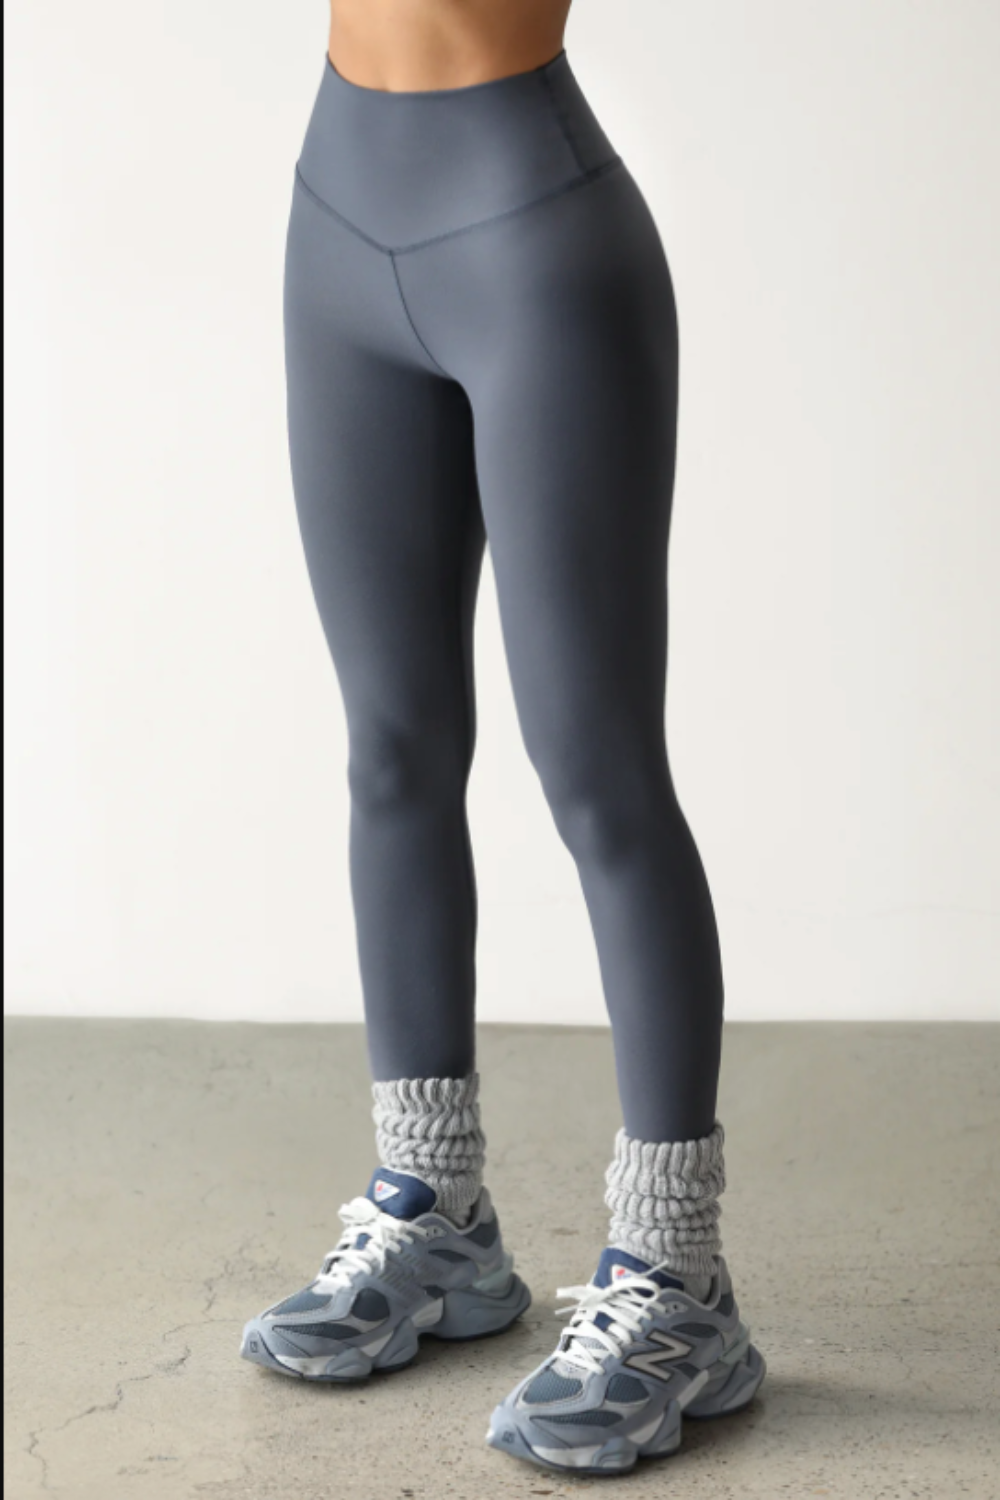 Second Skin Legging in Sueded Navy – Research and Design